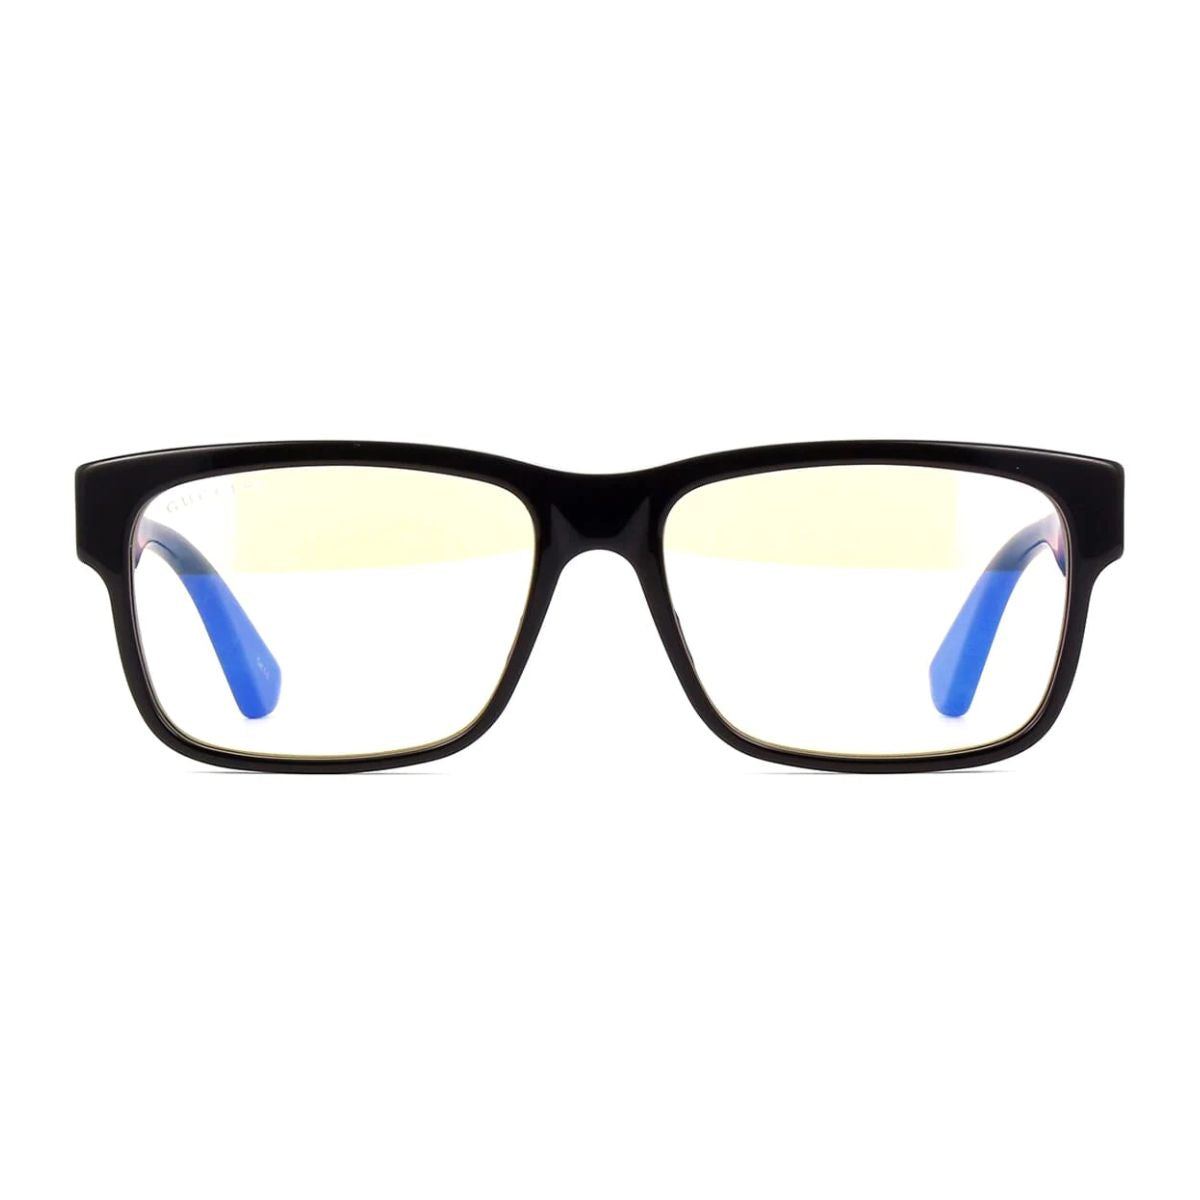 "Chic Gucci 0340S 011 Eyewear for Men - Shop the Best Selection at Optorium"